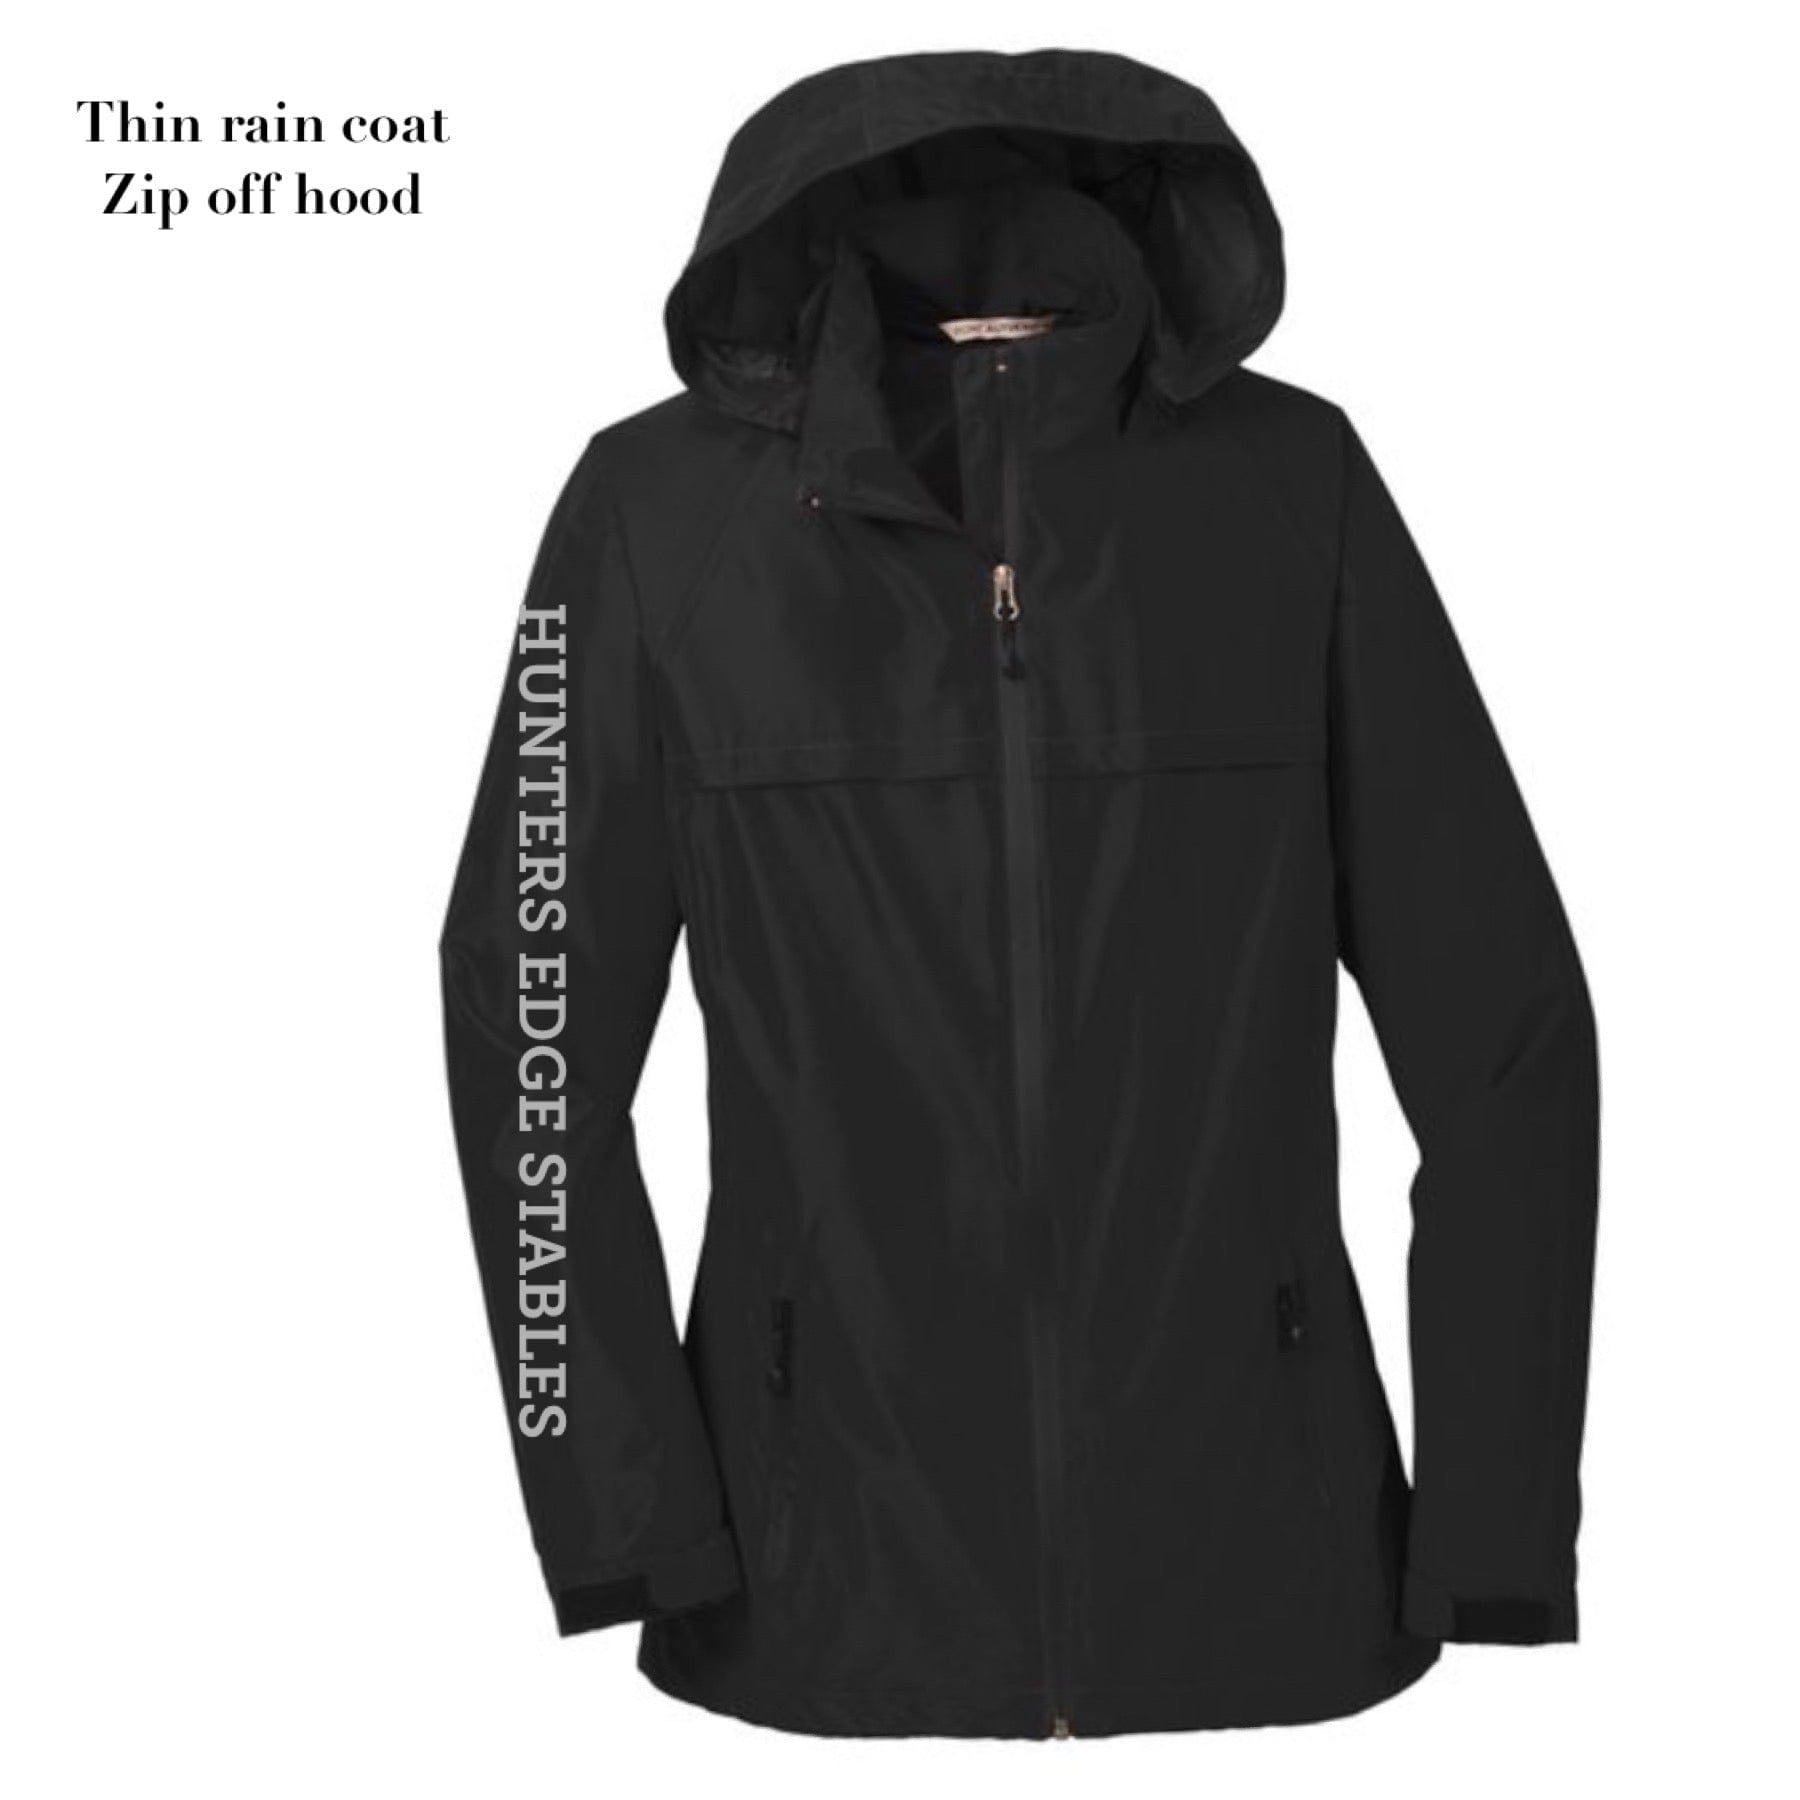 Equestrian Team Apparel Hunters Edge Stables Rain Coat equestrian team apparel online tack store mobile tack store custom farm apparel custom show stable clothing equestrian lifestyle horse show clothing riding clothes horses equestrian tack store